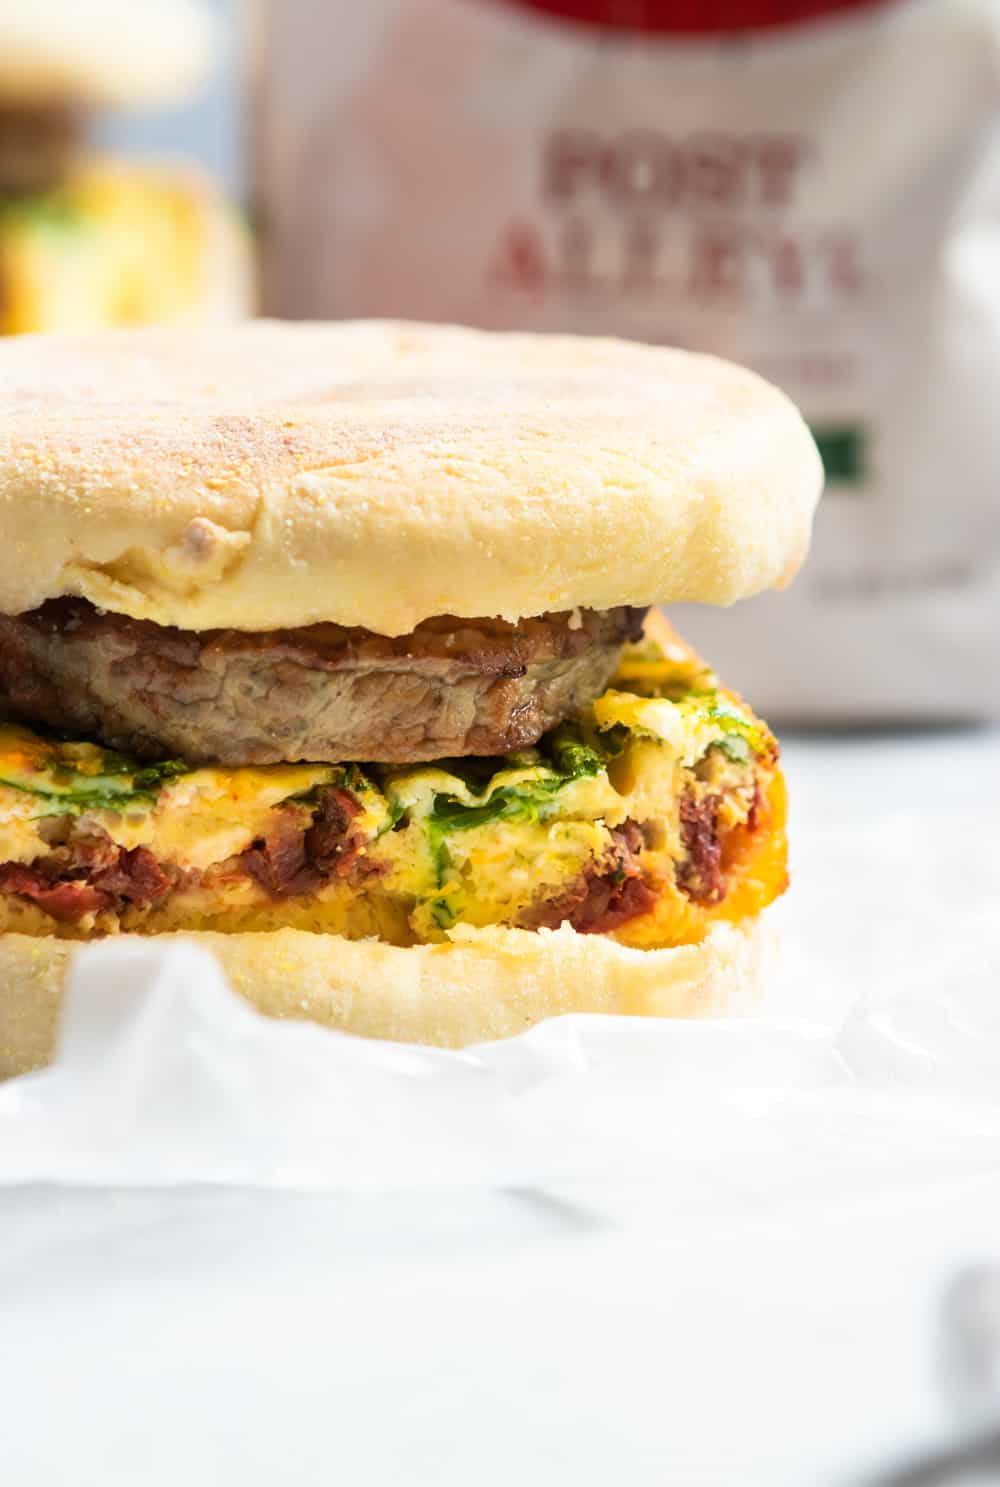 Spinach, Ham & Pepper Jack Cheese Breakfast Sandwich - plus a GIVEAWAY!